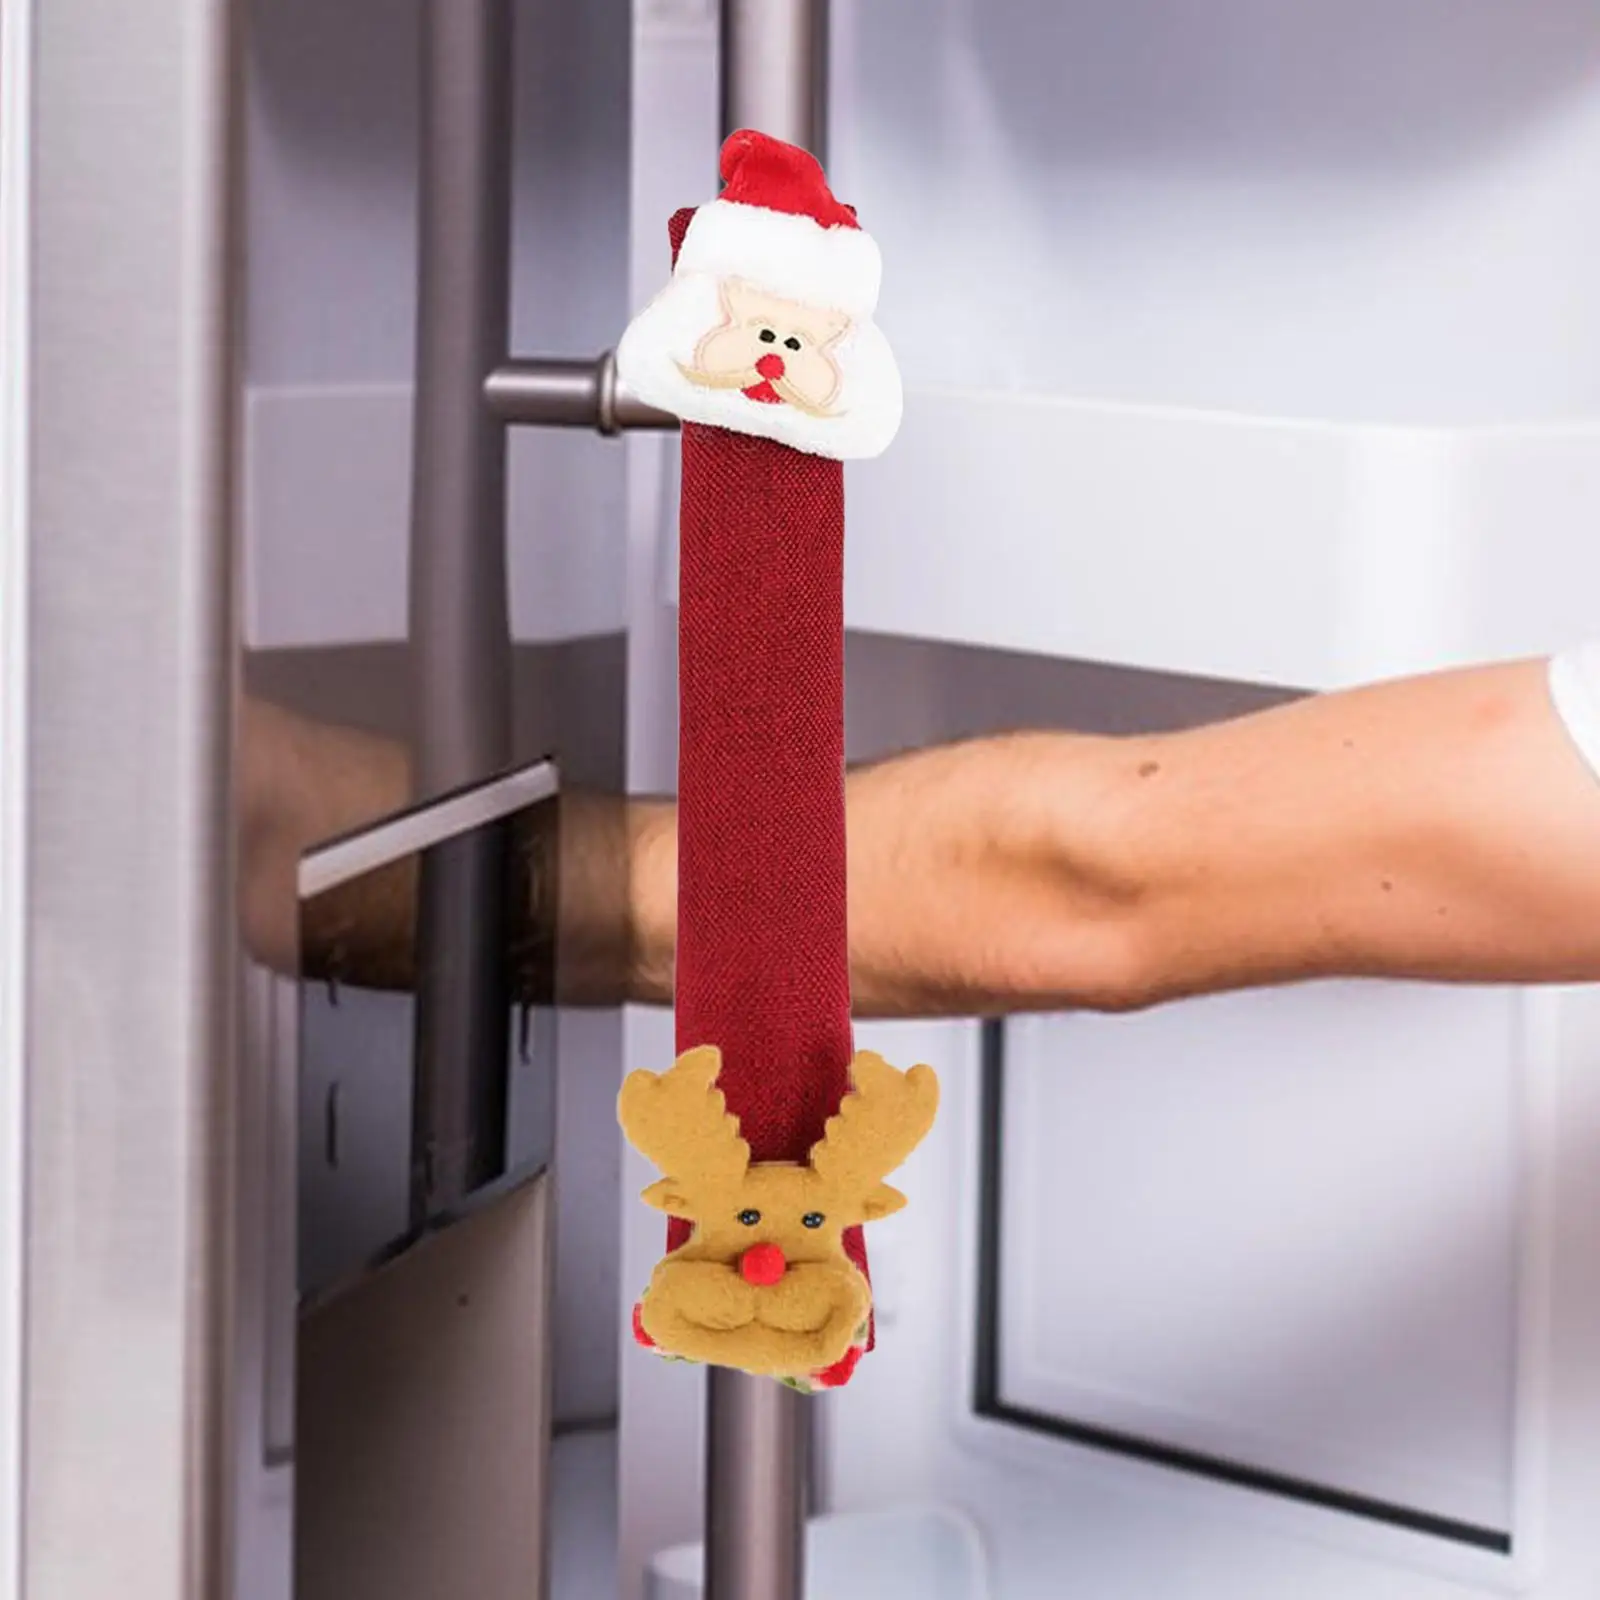 Christmas Refrigerator Door Handle Covers Holiday Decoration Door Pull Gloves for Home Fridge Christmas Oven Kitchen Appliances